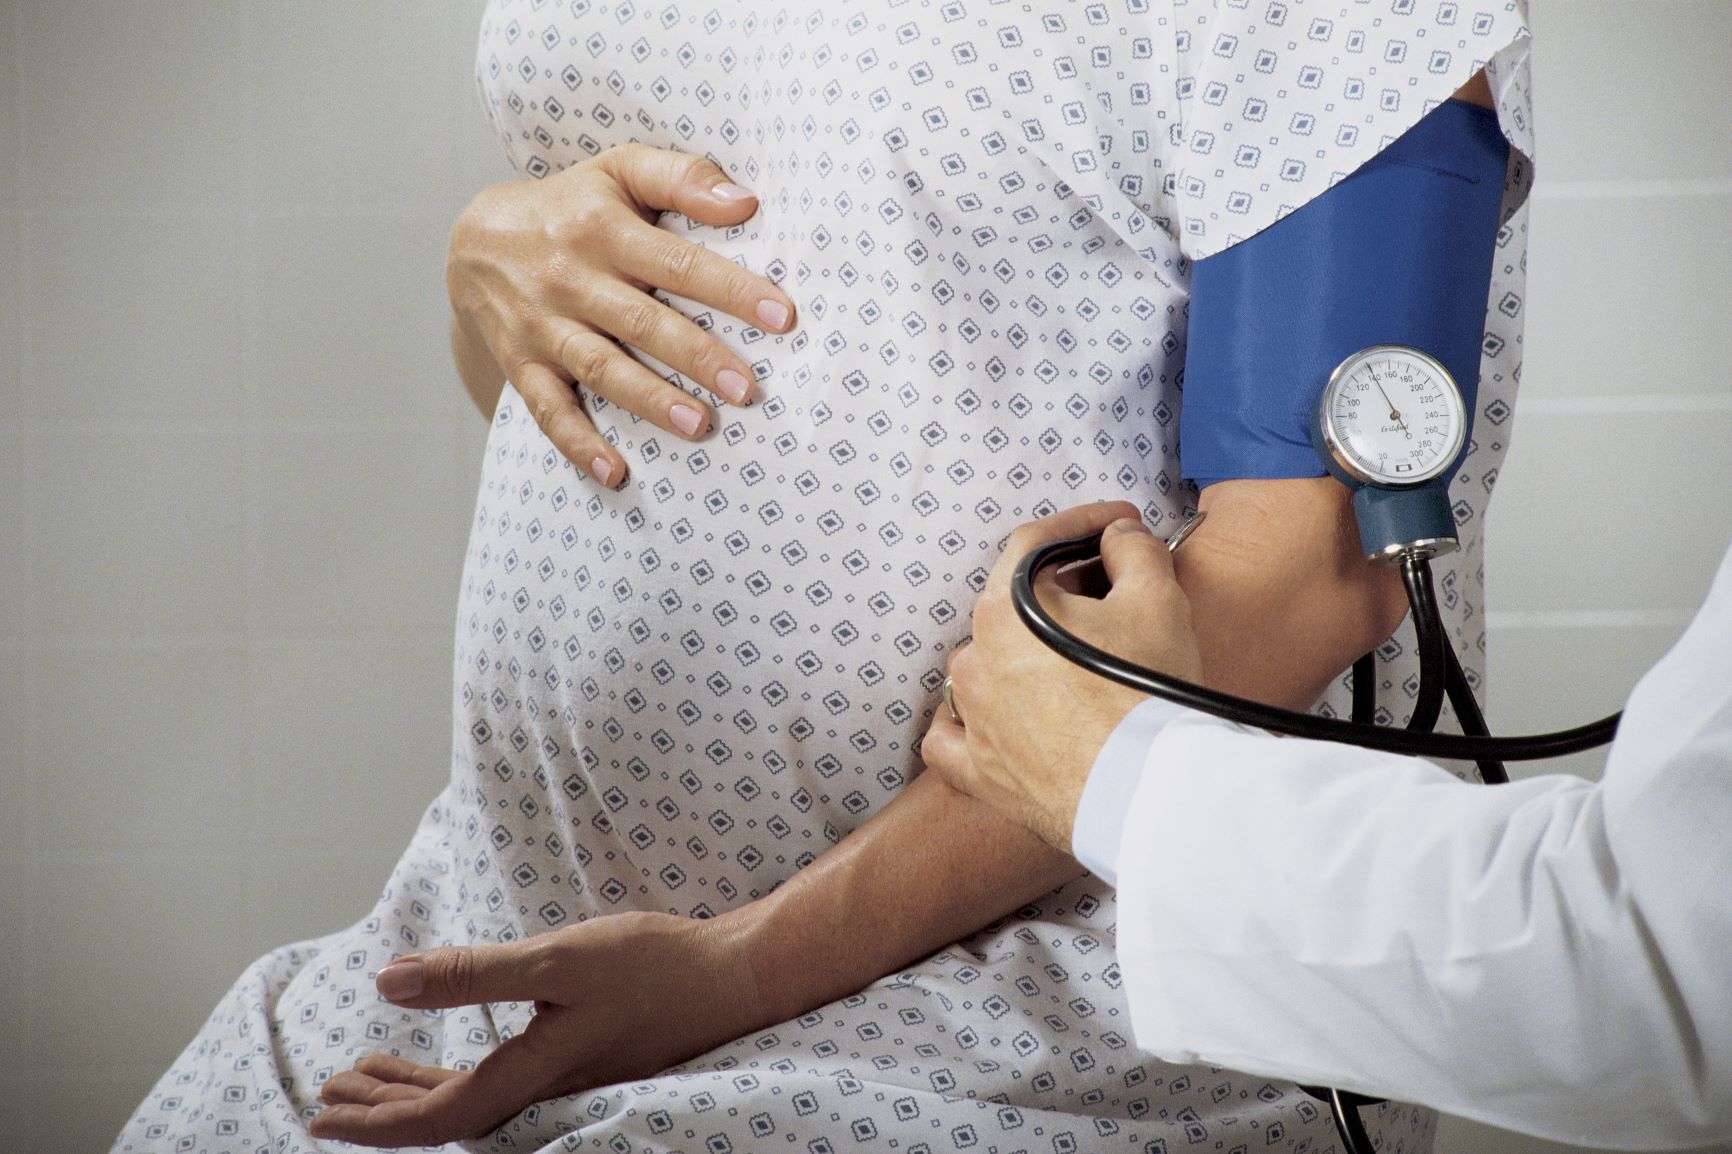 Stock image/Stem cell treatments have potential to  treat preeclampsia  in pregnancy 